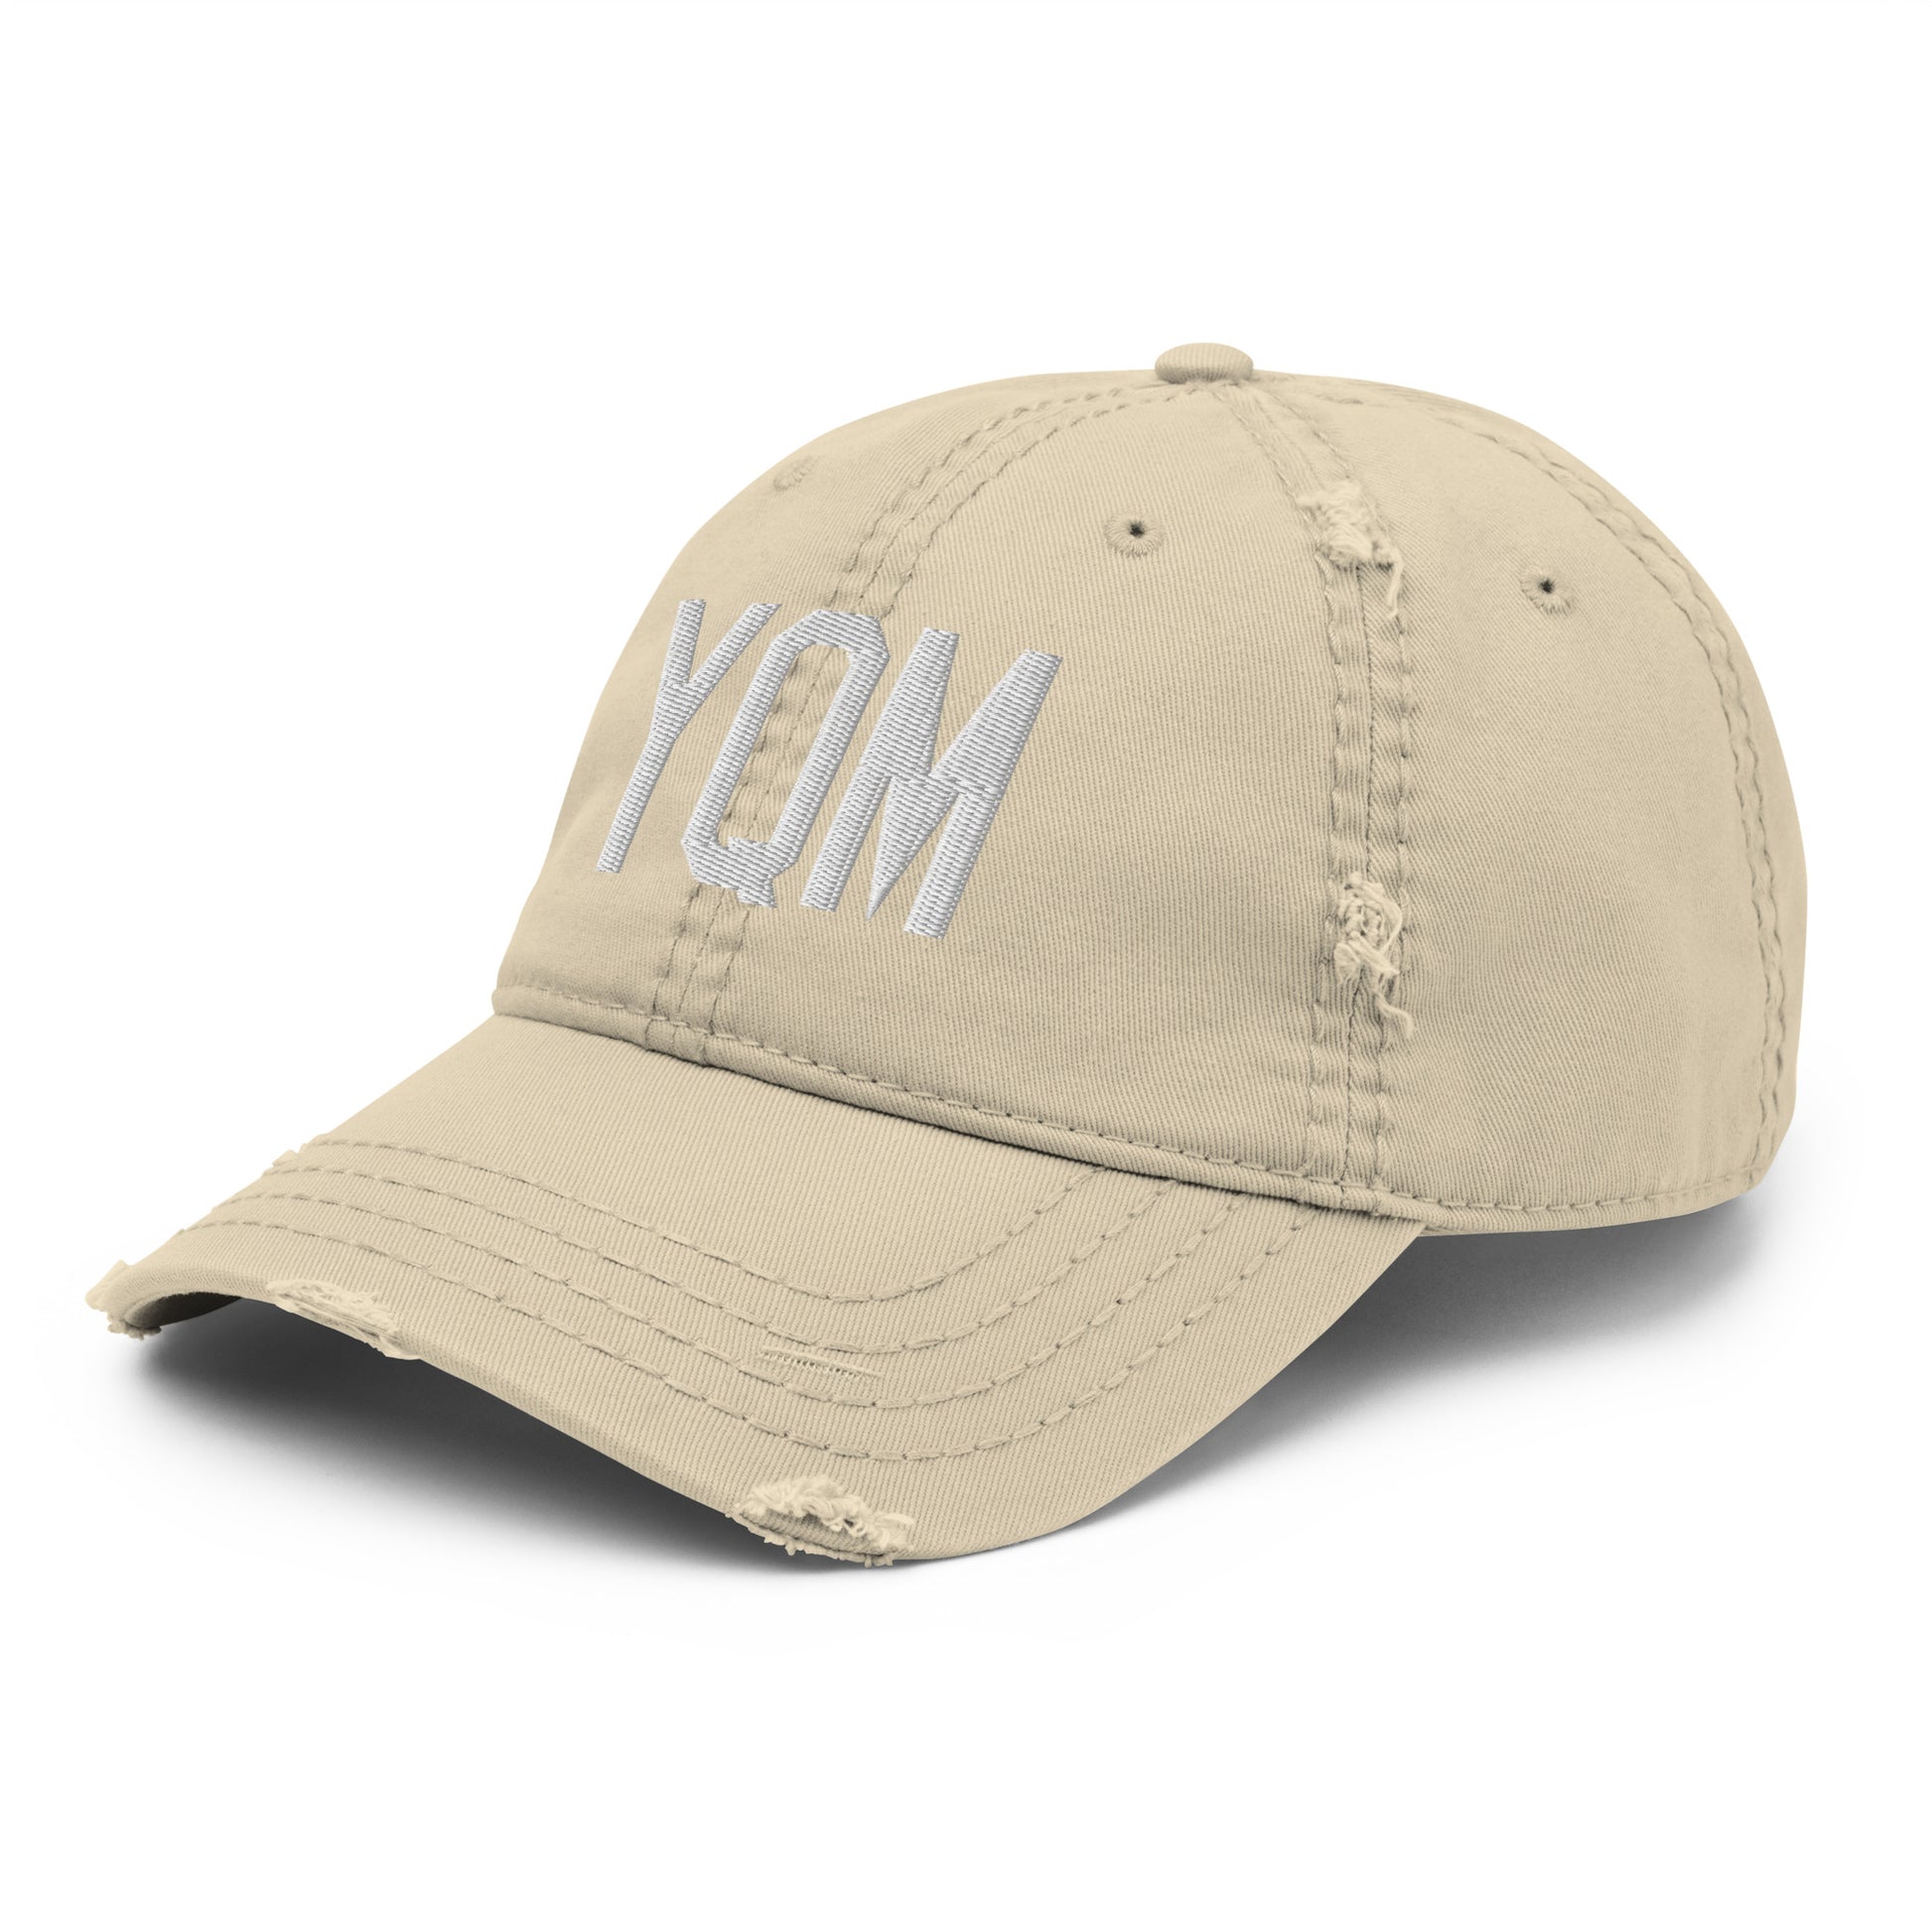 Airport Code Distressed Hat - White • YQM Moncton • YHM Designs - Image 19